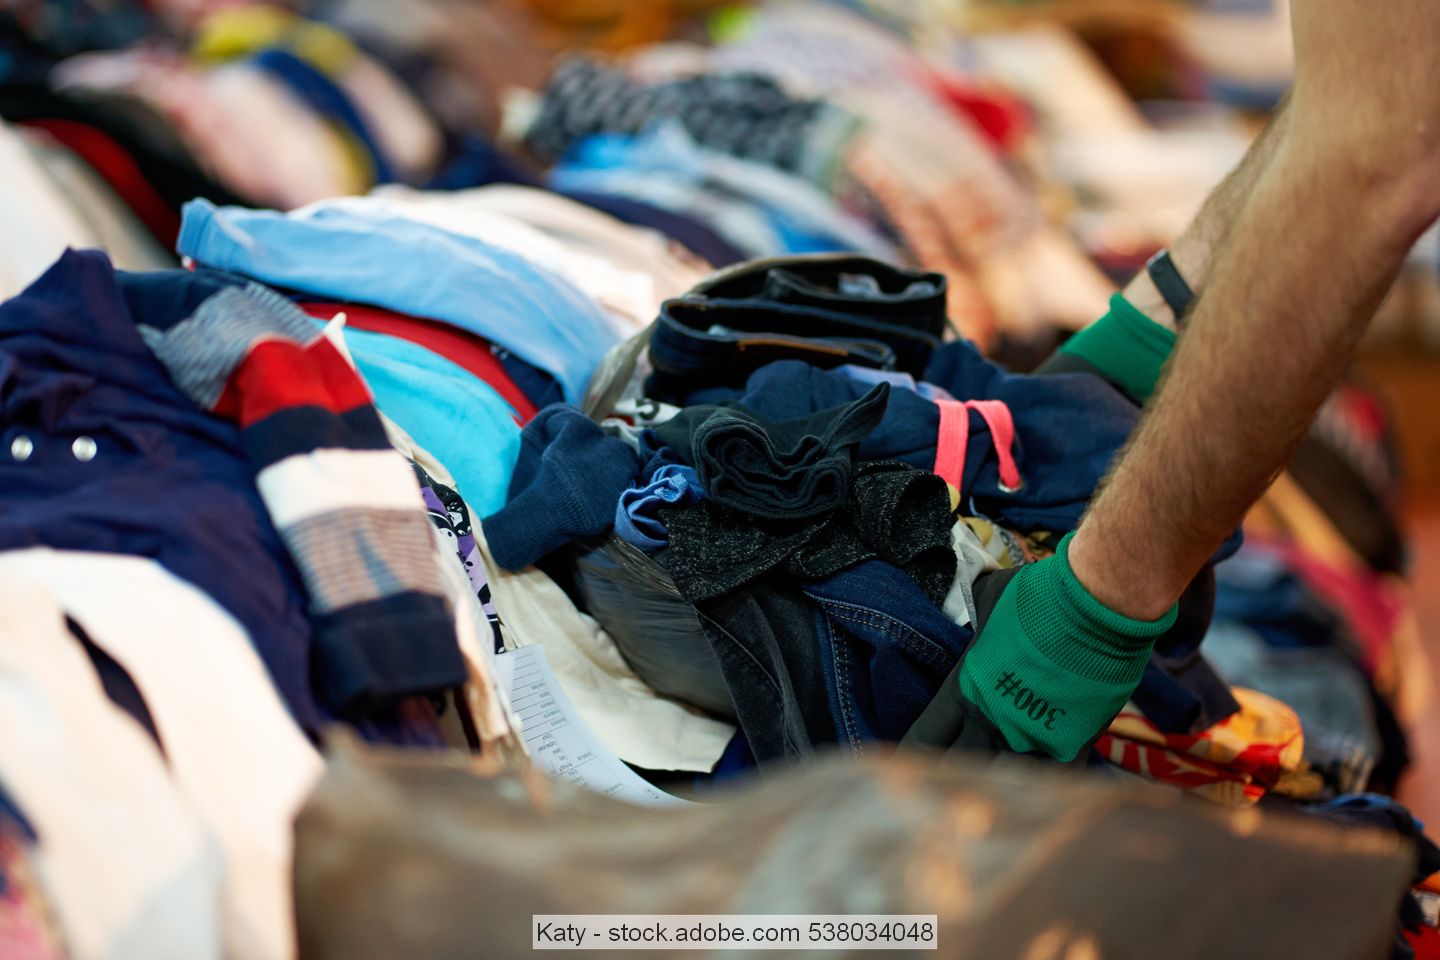 Man wearing workgloves sorts through piles of used clothing